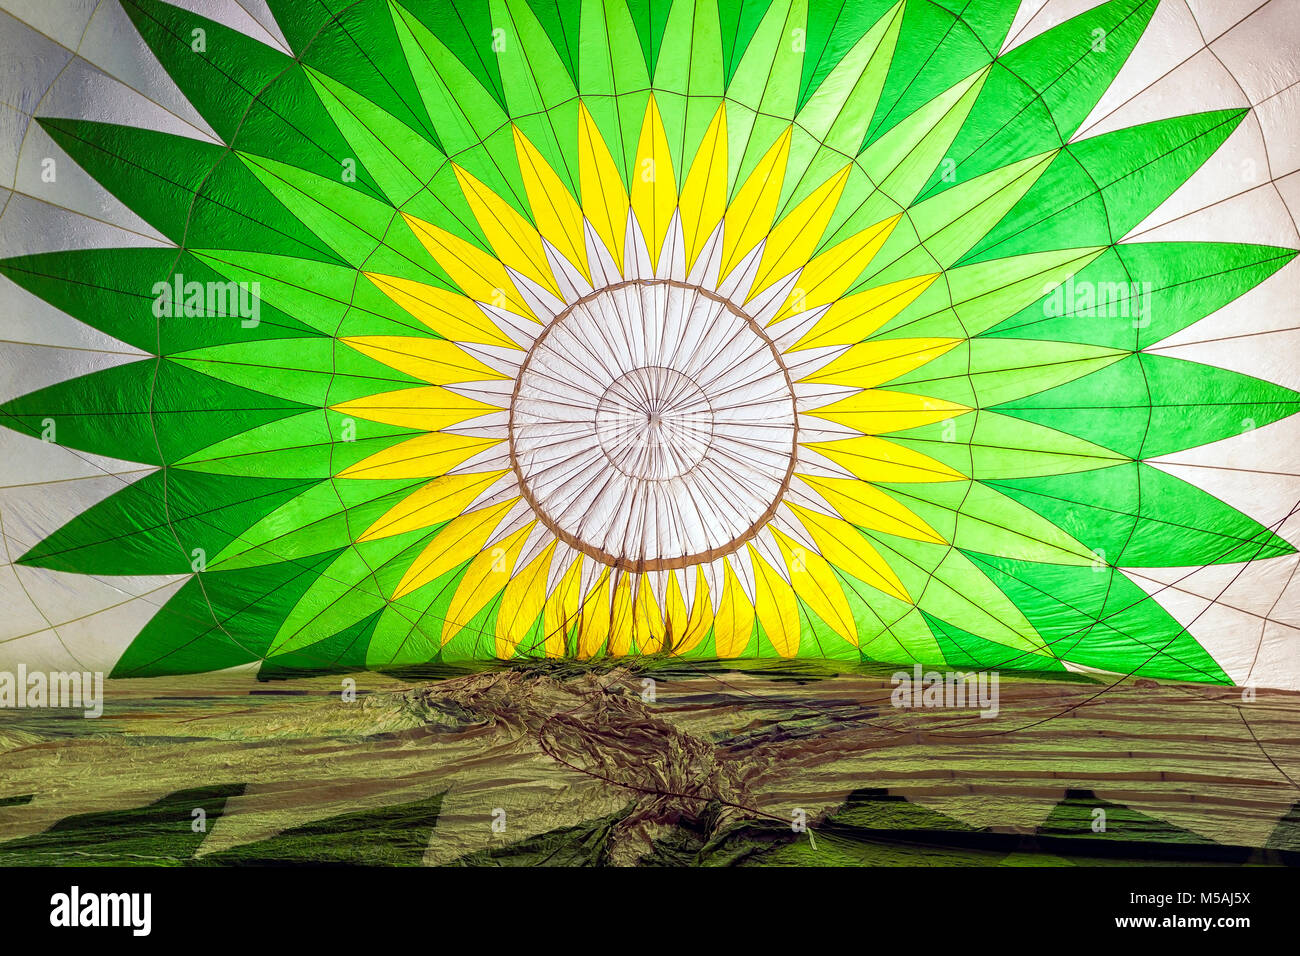 Inside a green and white patterned hot air balloon in preparation Stock Photo